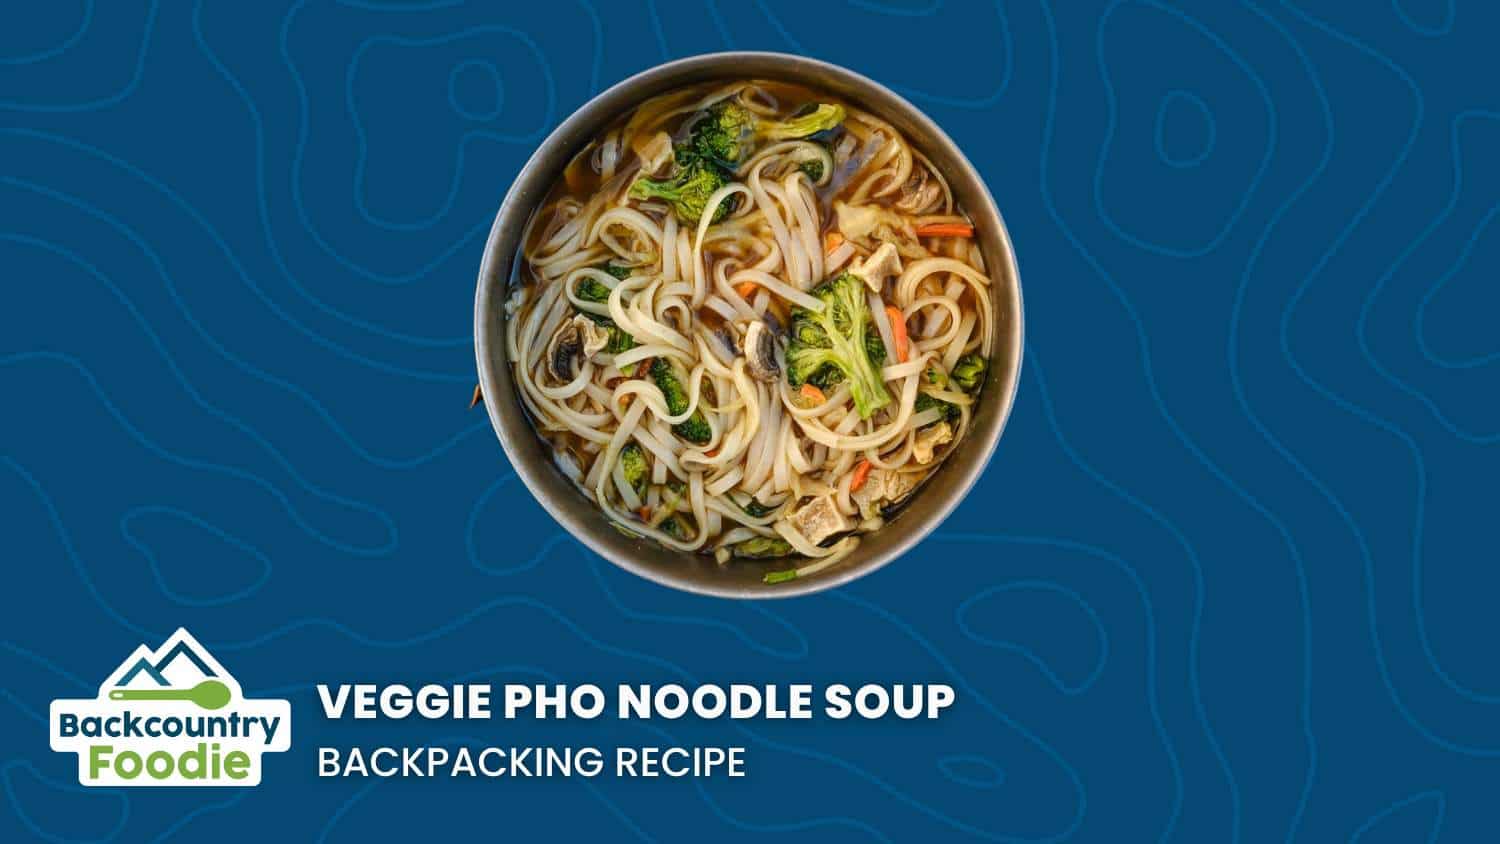 Backcountry Foodie Veggie Pho Noodle Soup DIY Backpacking Recipe thumbnail image